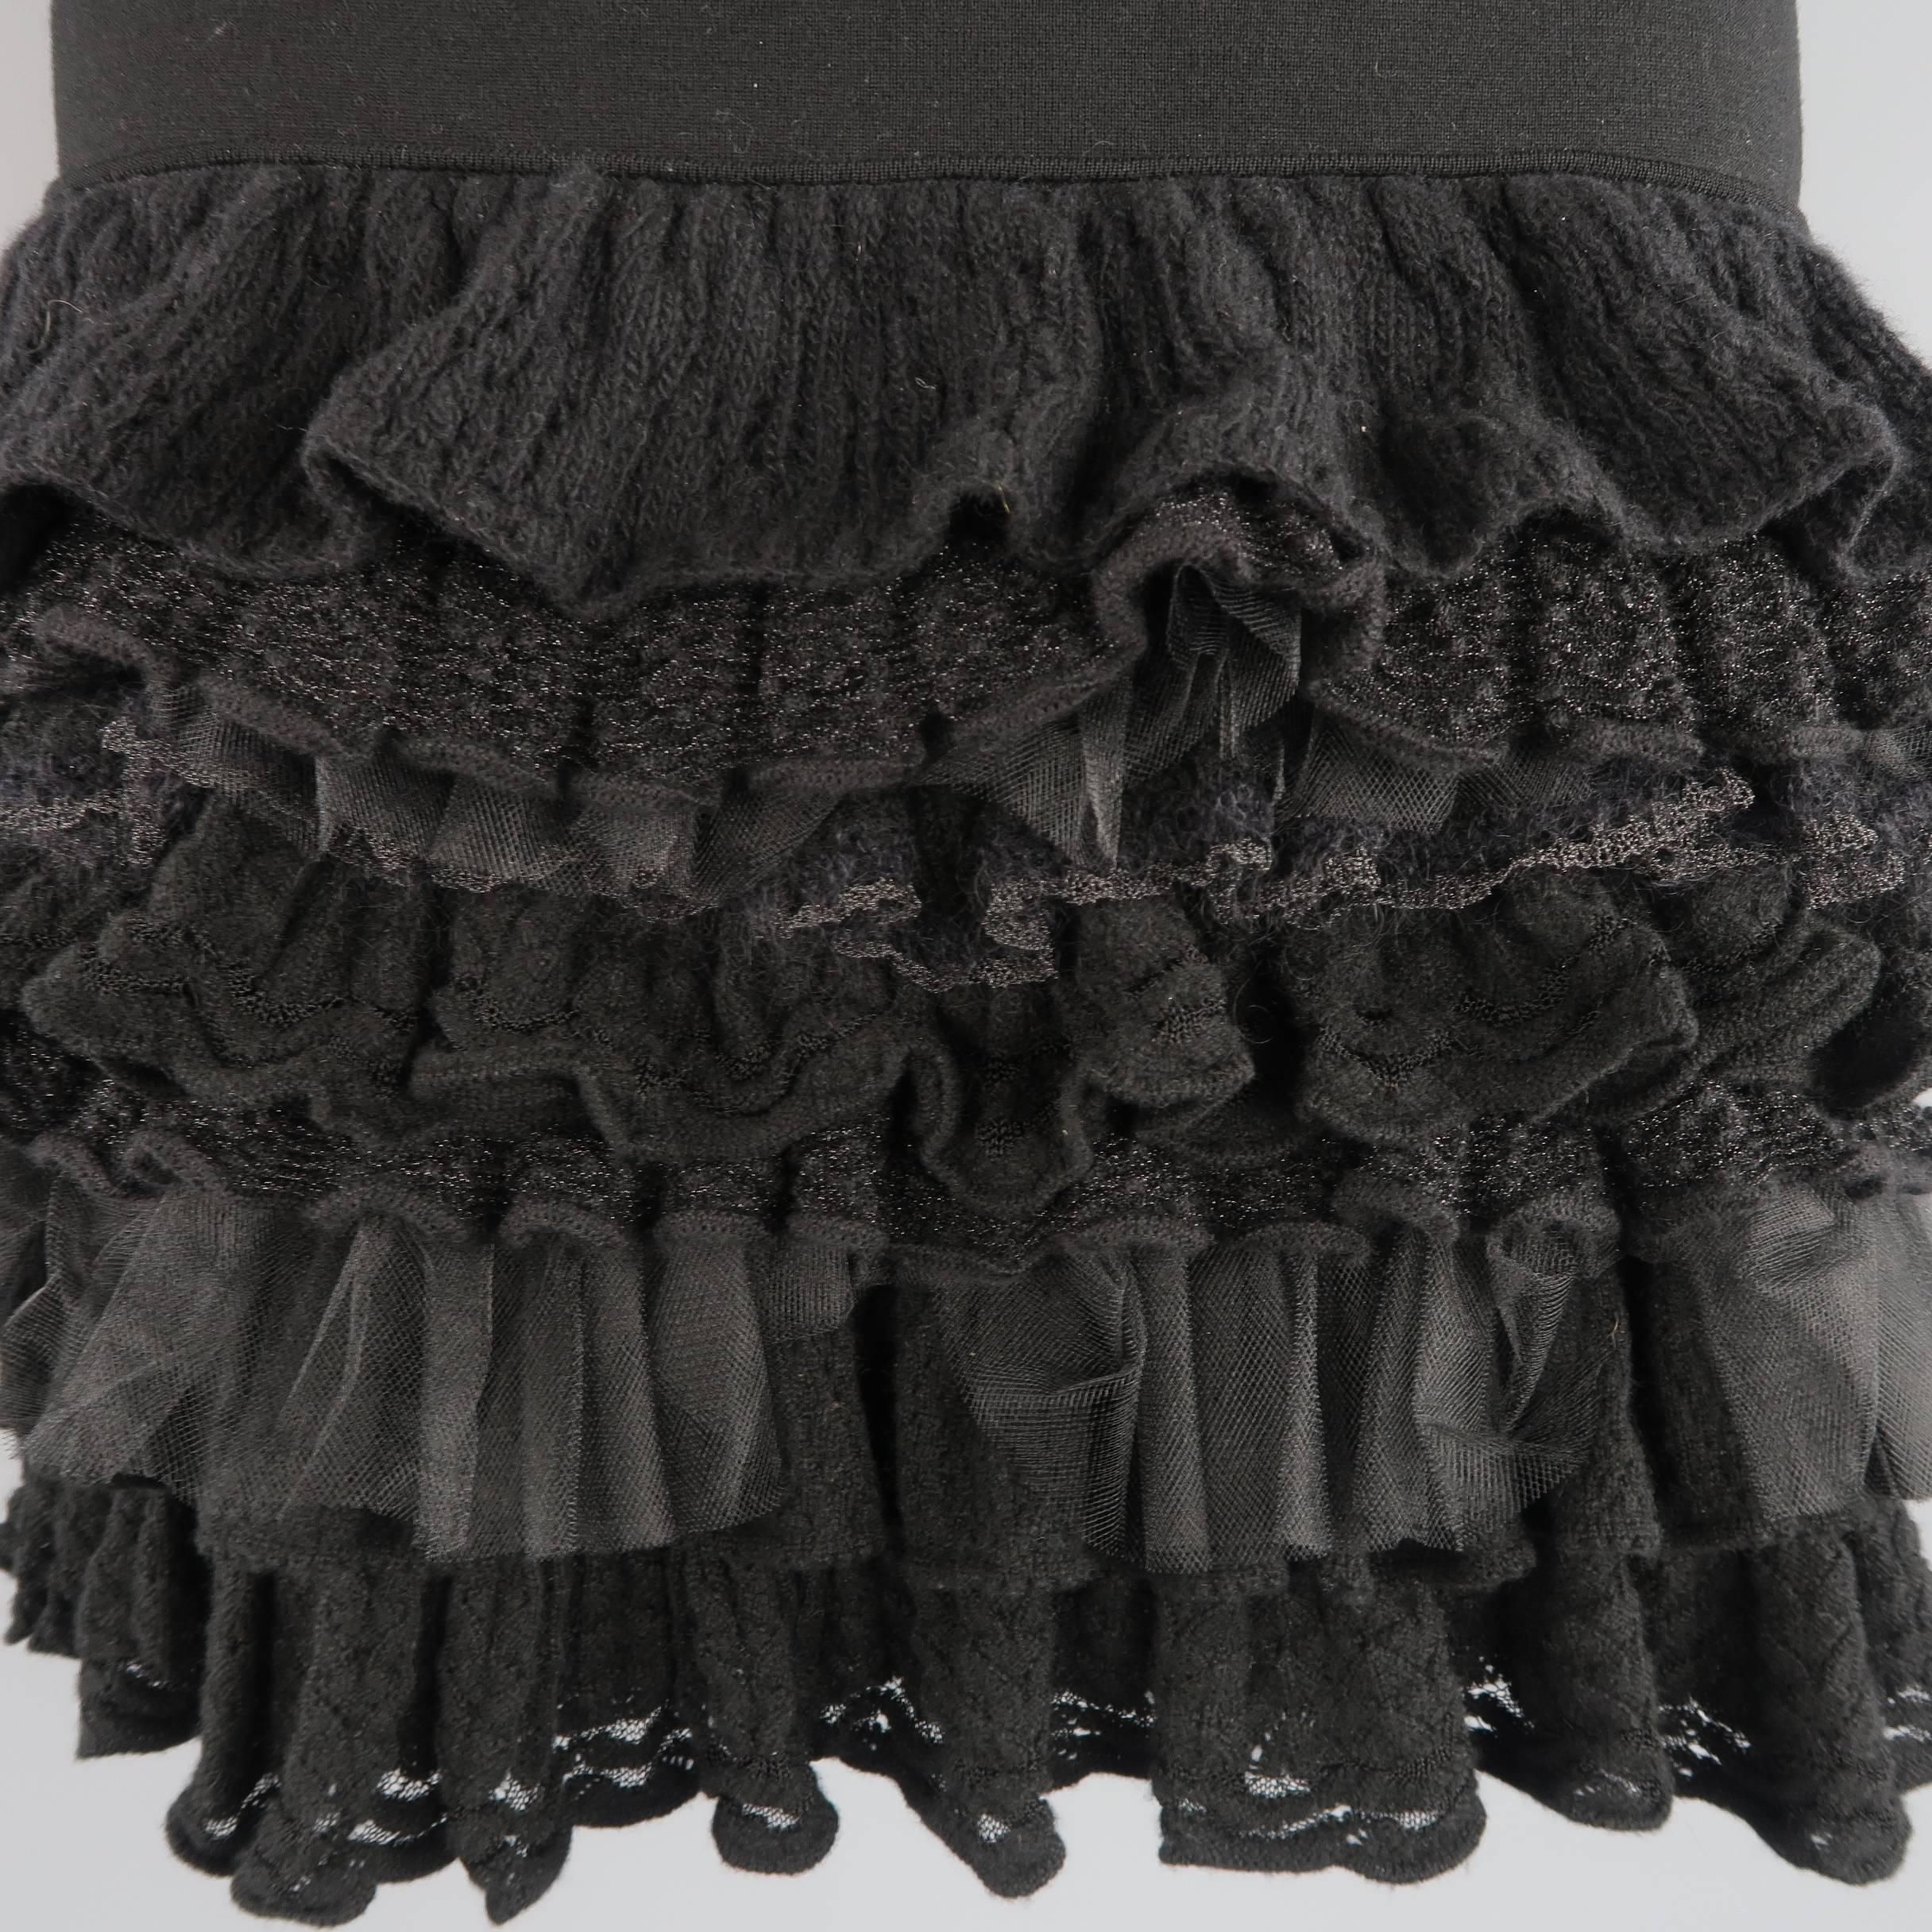 RALPH LAUREN COLLECTION pencil skirt comes in a stretch wool jersey and features a drop waist with layers of crochet, tulle, and lace ruffles. Made in Italy.
 
Excellent Pre-Owned Condition.
Marked: M
 
Measurements:
 
Waist: 26 in.
Hip: 34